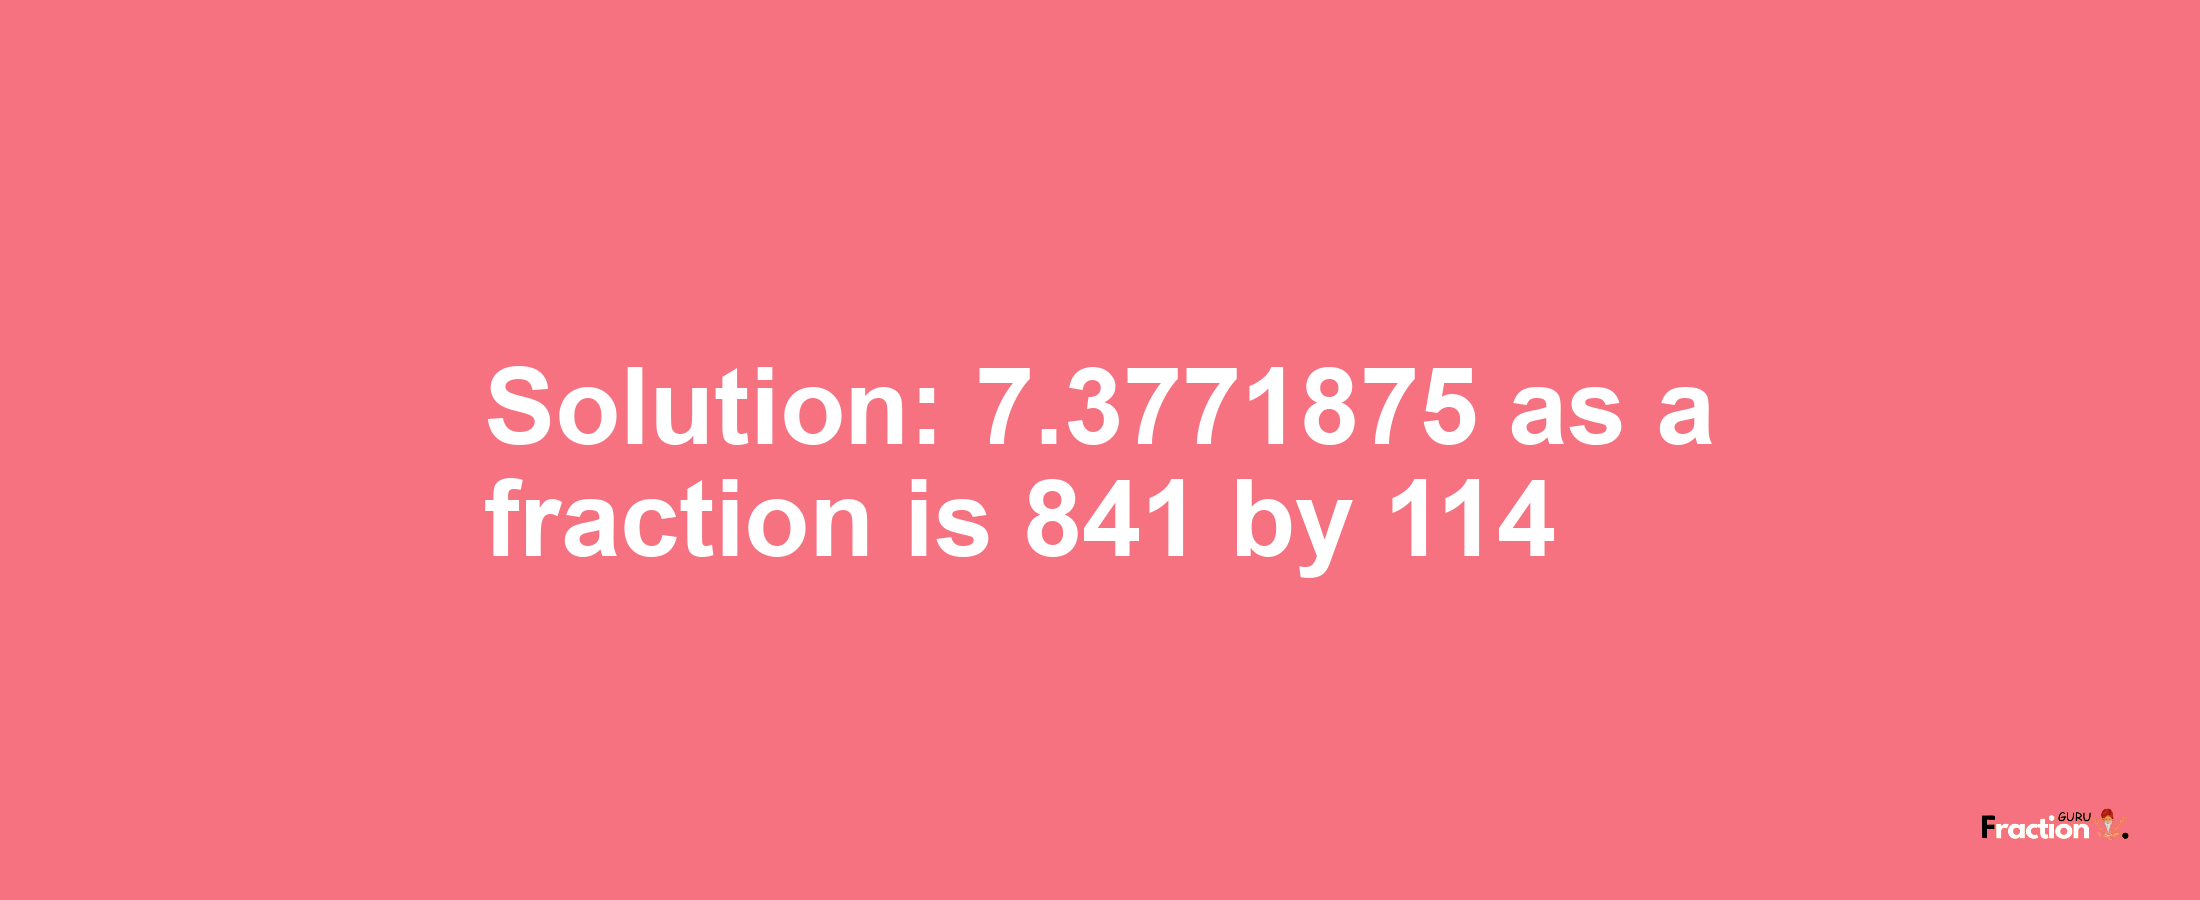 Solution:7.3771875 as a fraction is 841/114